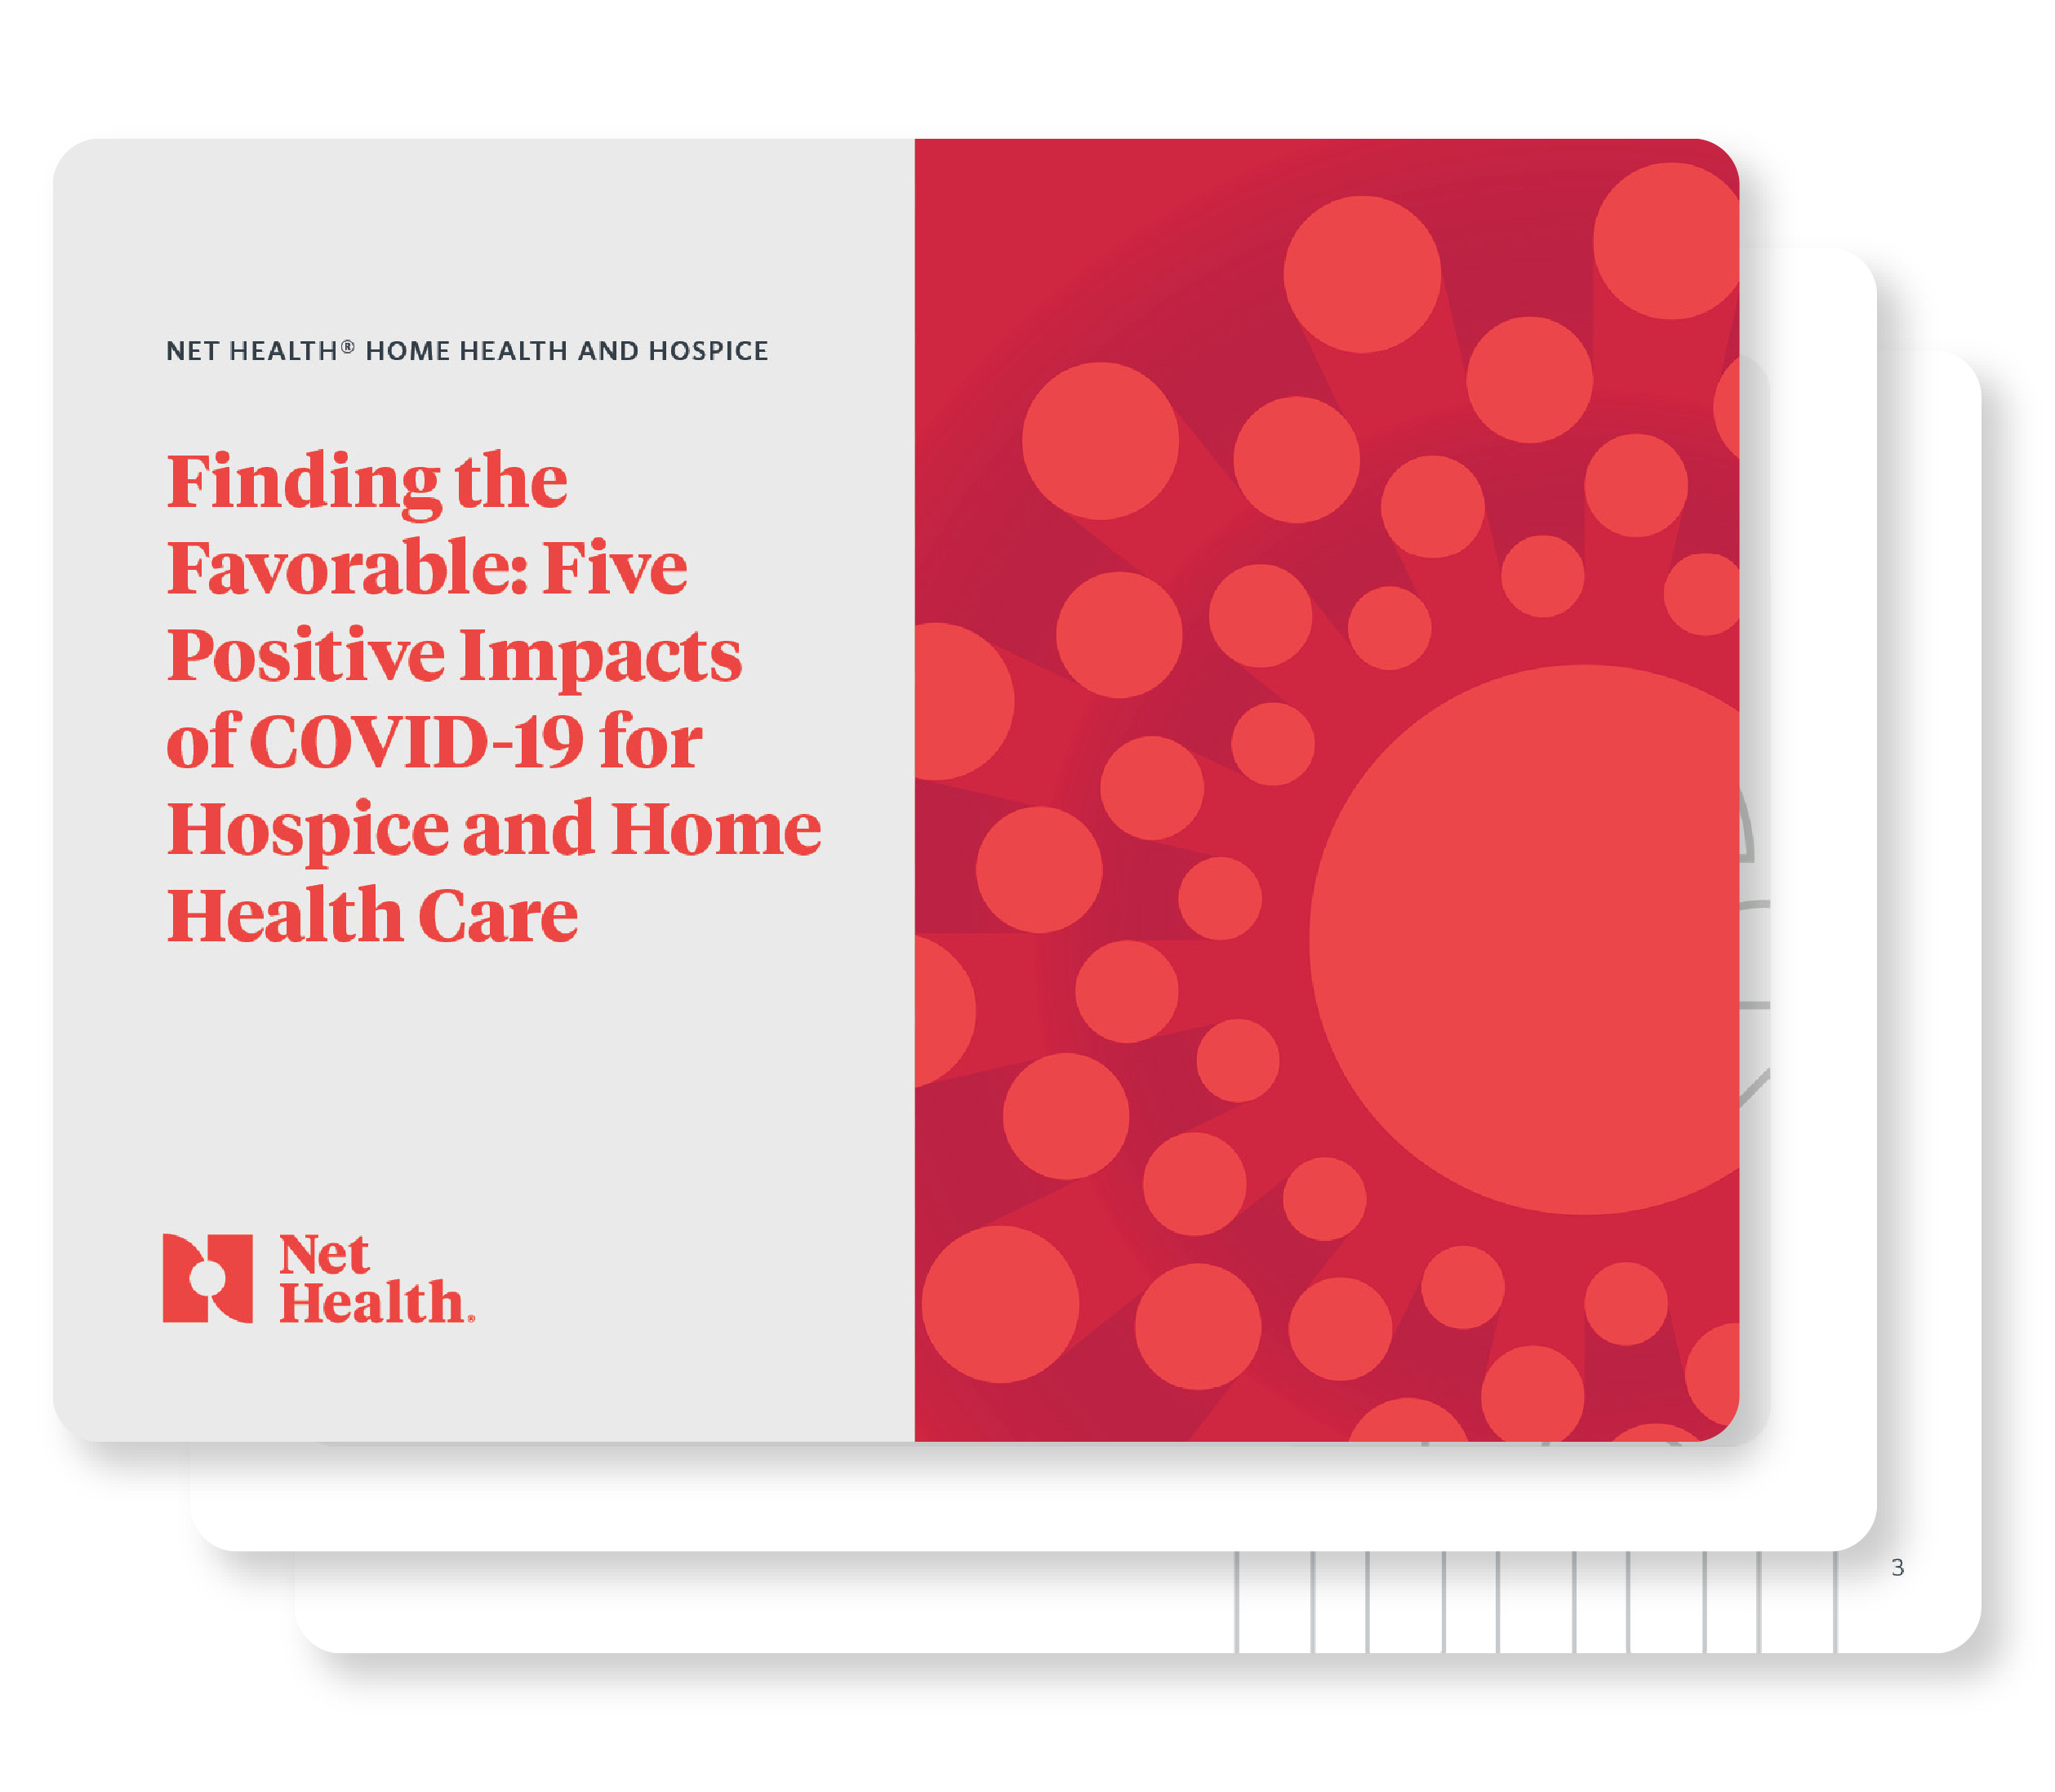 Finding the Favorable: 5 Positive Impacts of COVID-19 for Hospice and Home Health Care